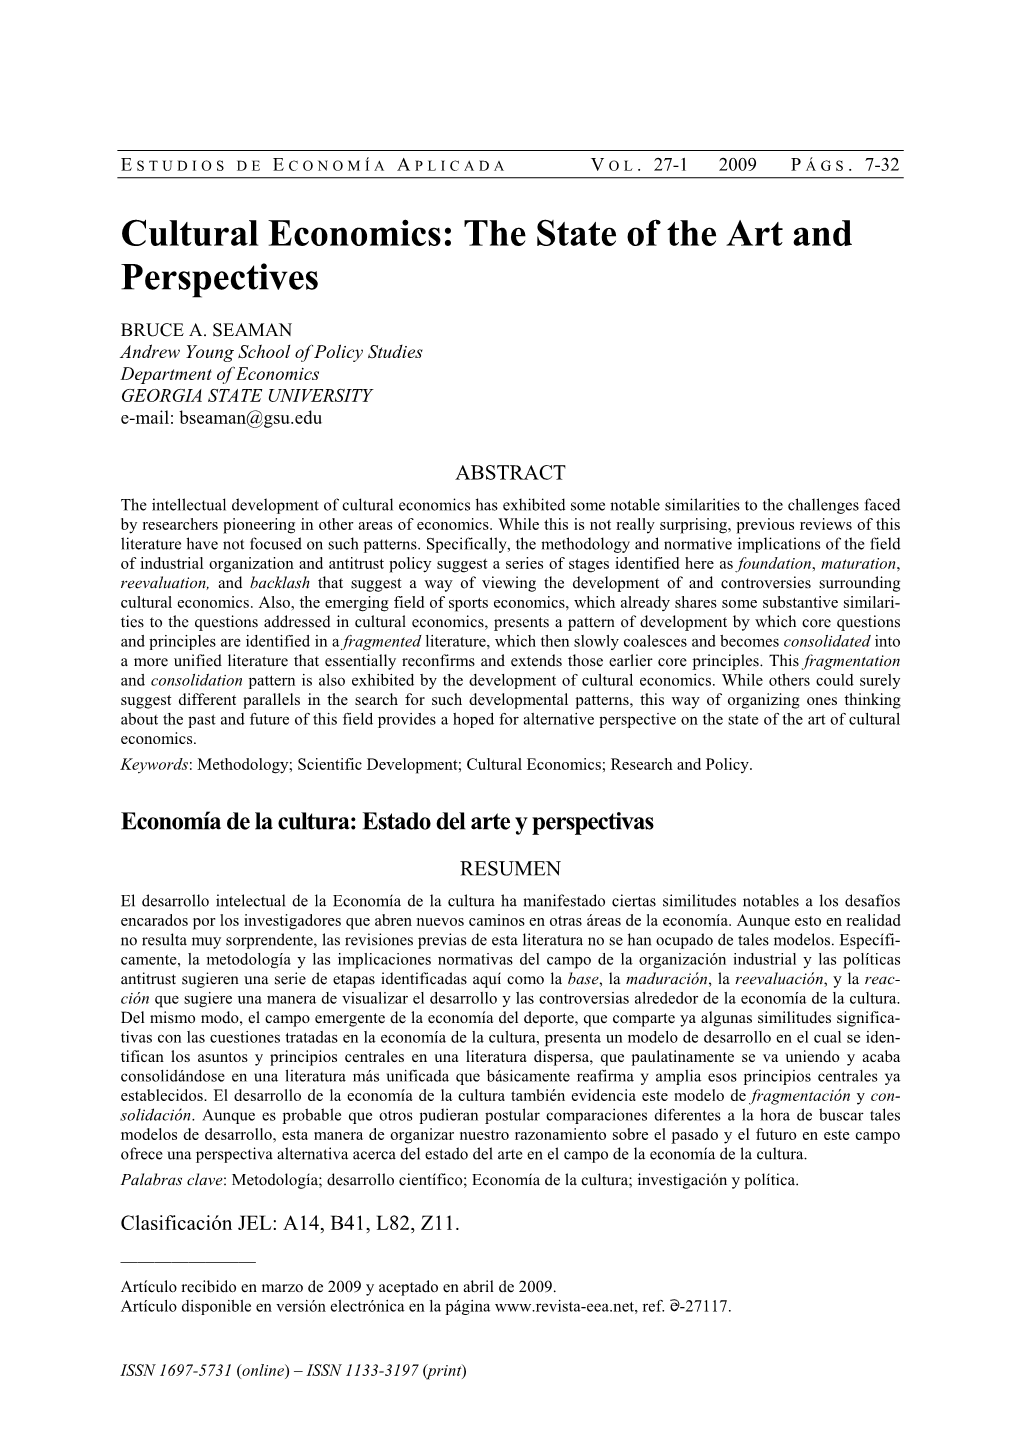 Cultural Economics: the State of the Art and Perspectives